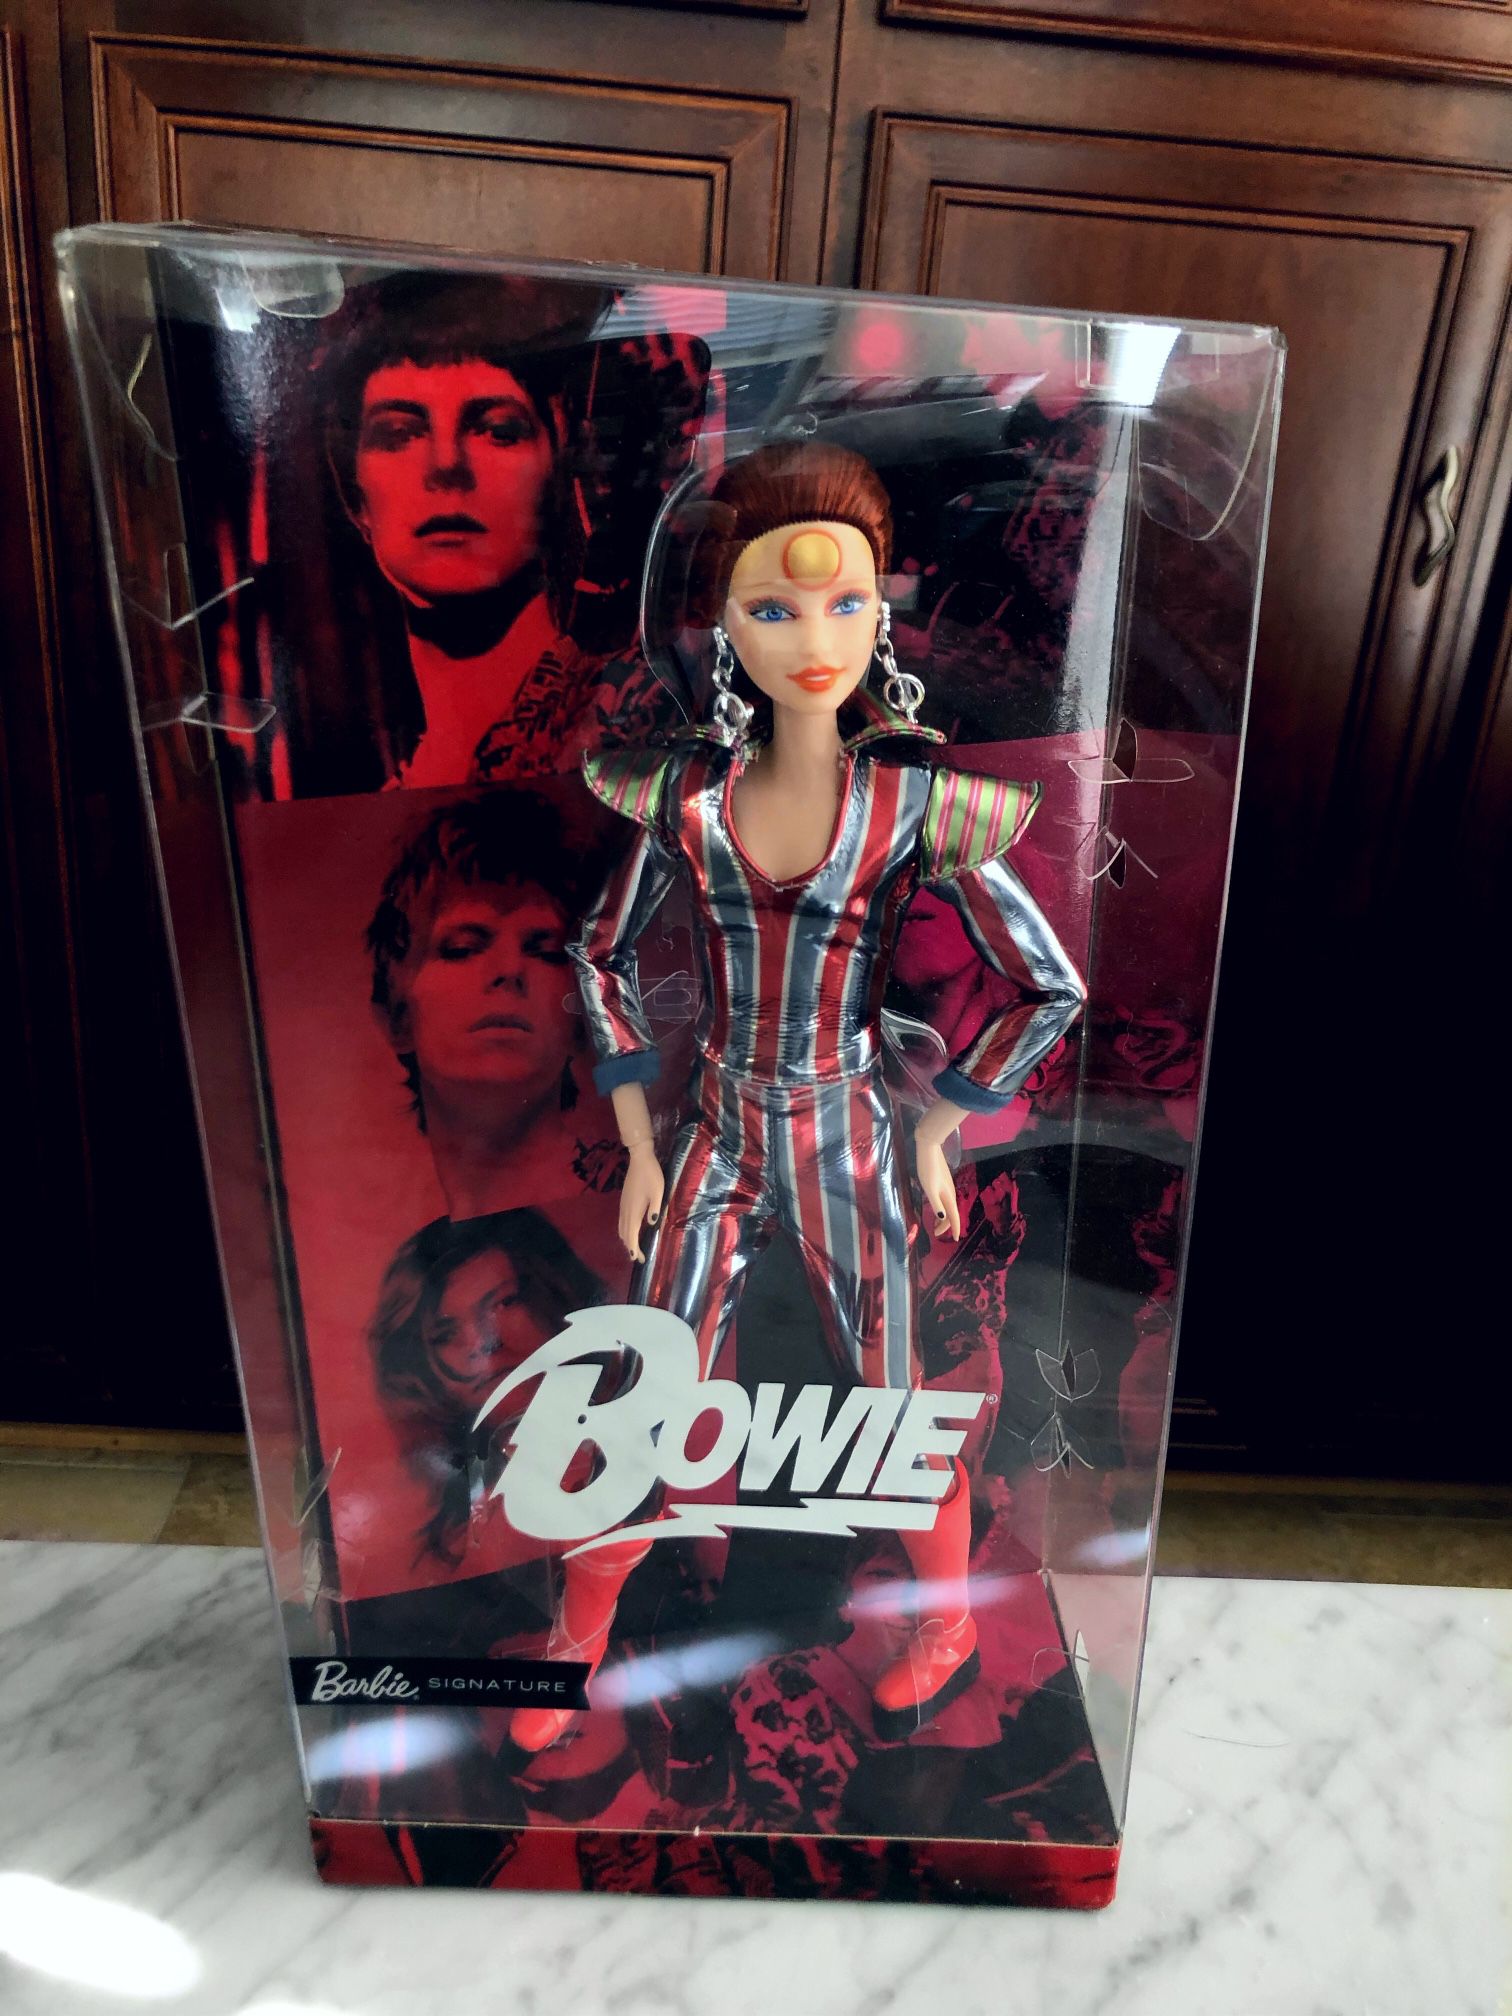 New in Box David Bowie Barbie Doll Limited Edition